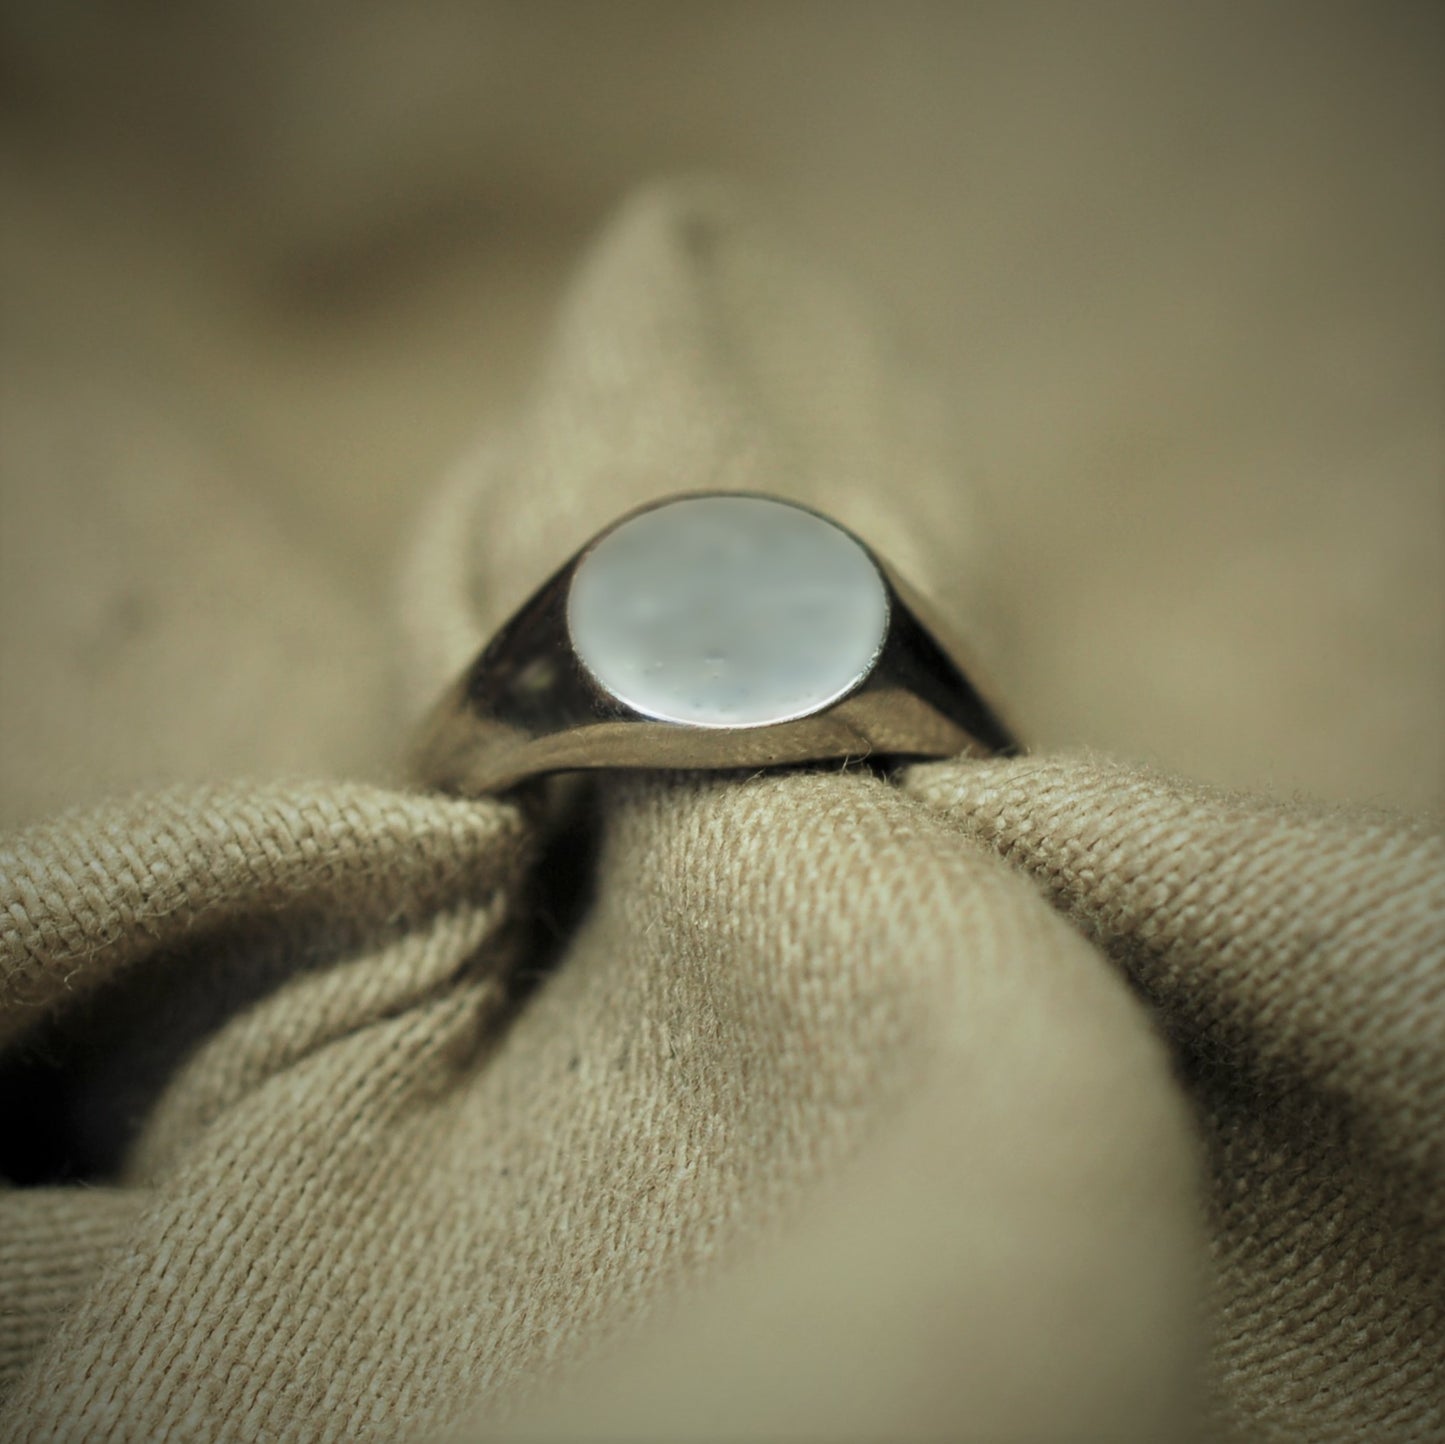 Palladium signet ring, suitable for a Lady or young Gentleman. Handmade in England, with Hallmarks. UK ‘H’, US 4.  *This piece is ready to be shipped*